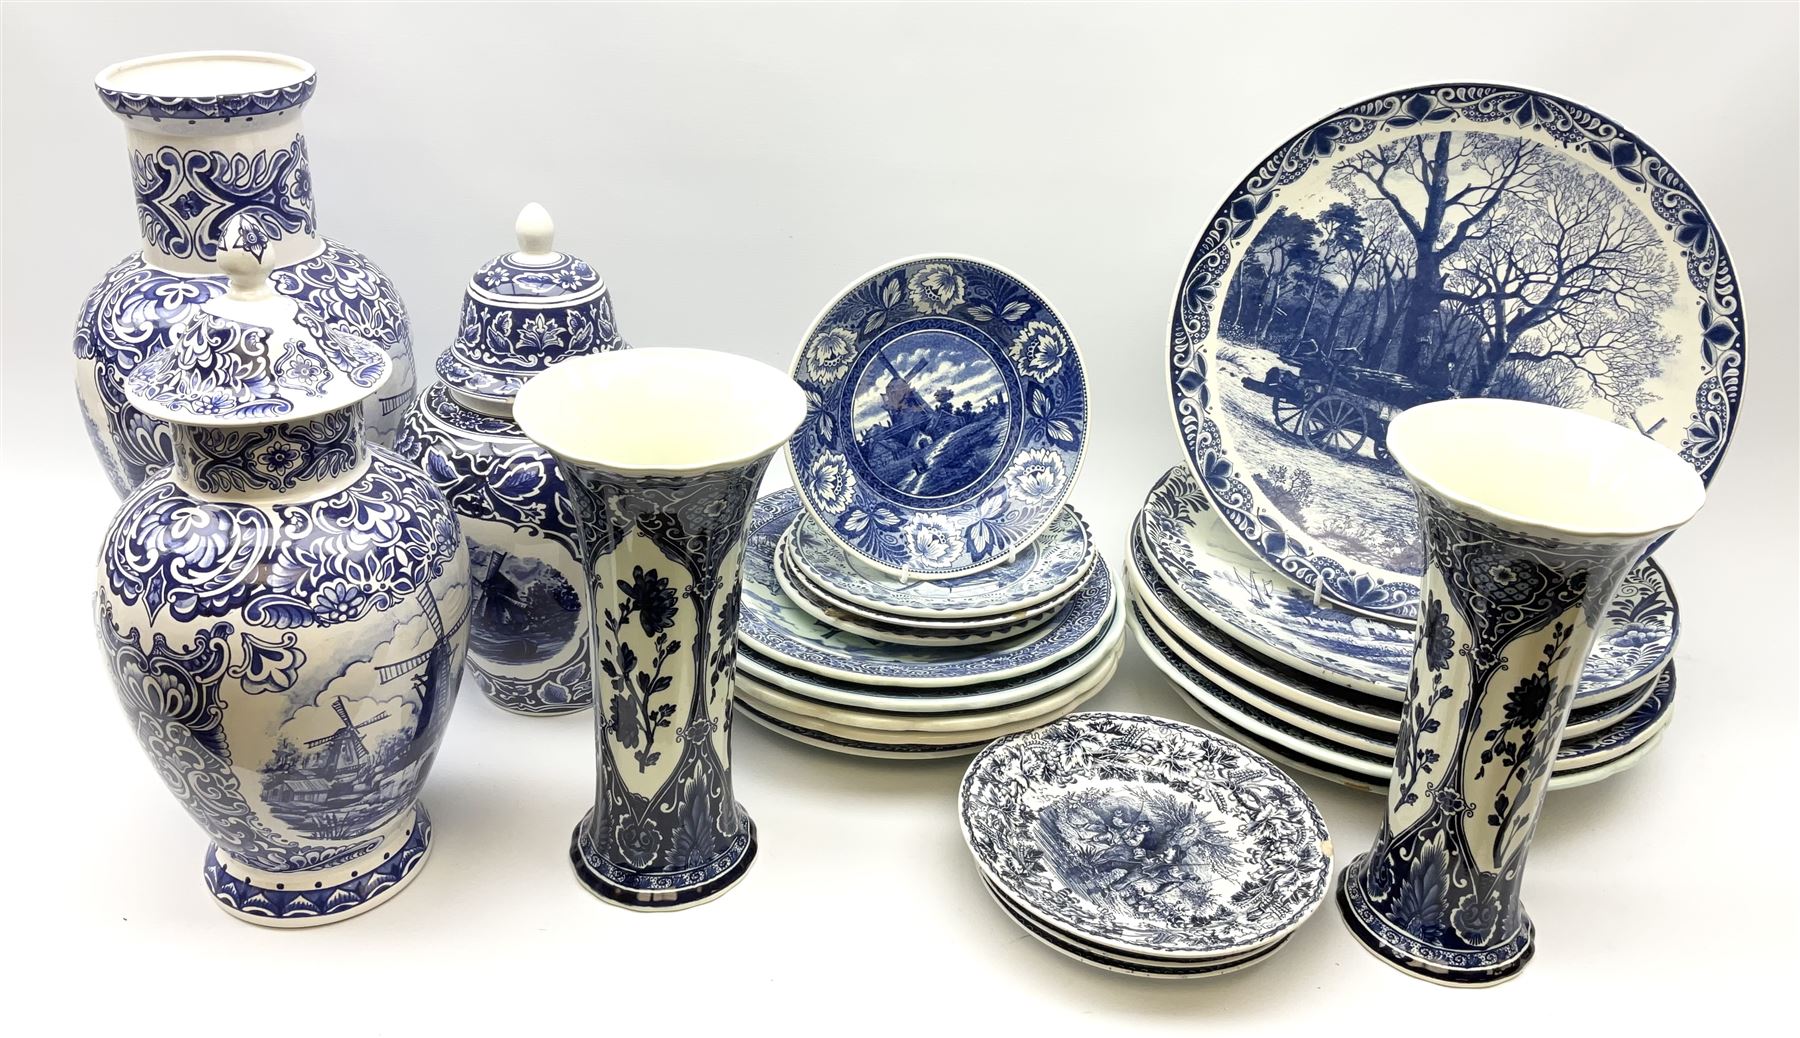 A large collection of modern transfer printed Delft ware